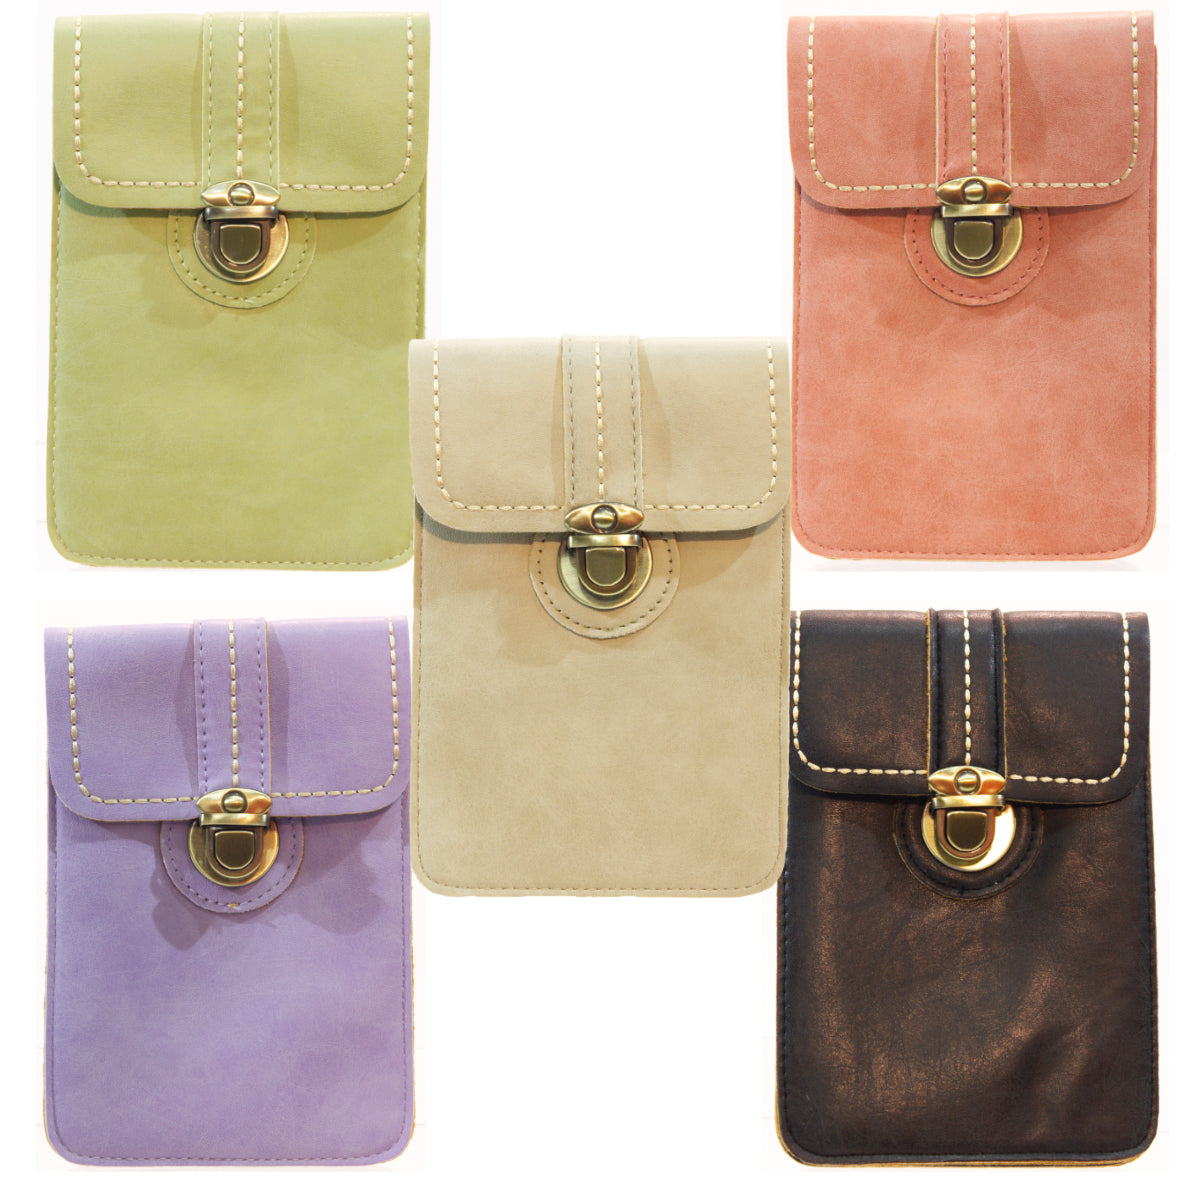 Cindy X-Body Pouches in different colors